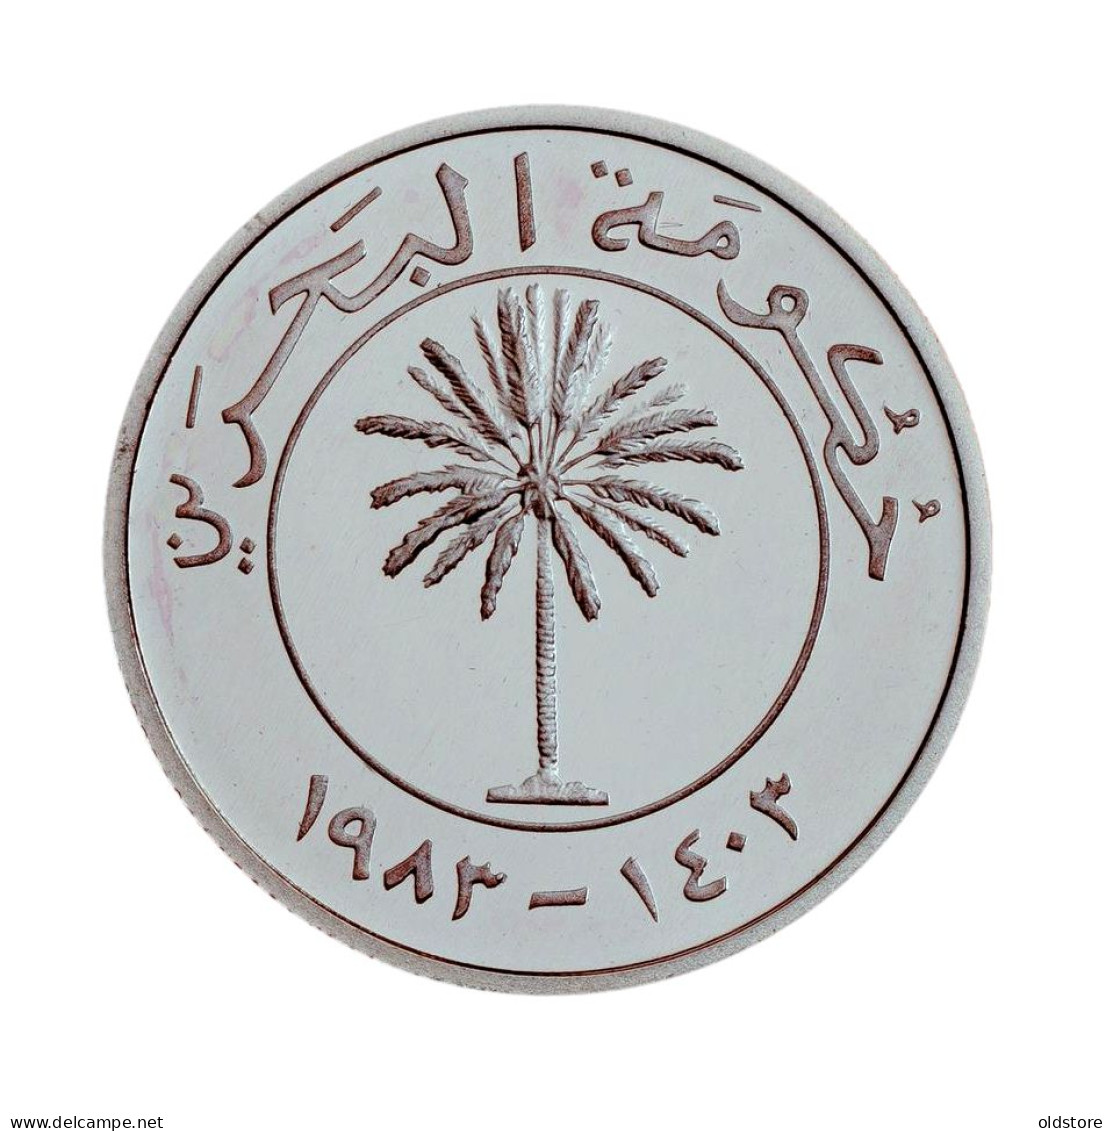 Bahrain Coins - MINT (25 Fils ) Proof  -  Sterling Silver - ND 1983 - Mint Silver Coins - Bahrain